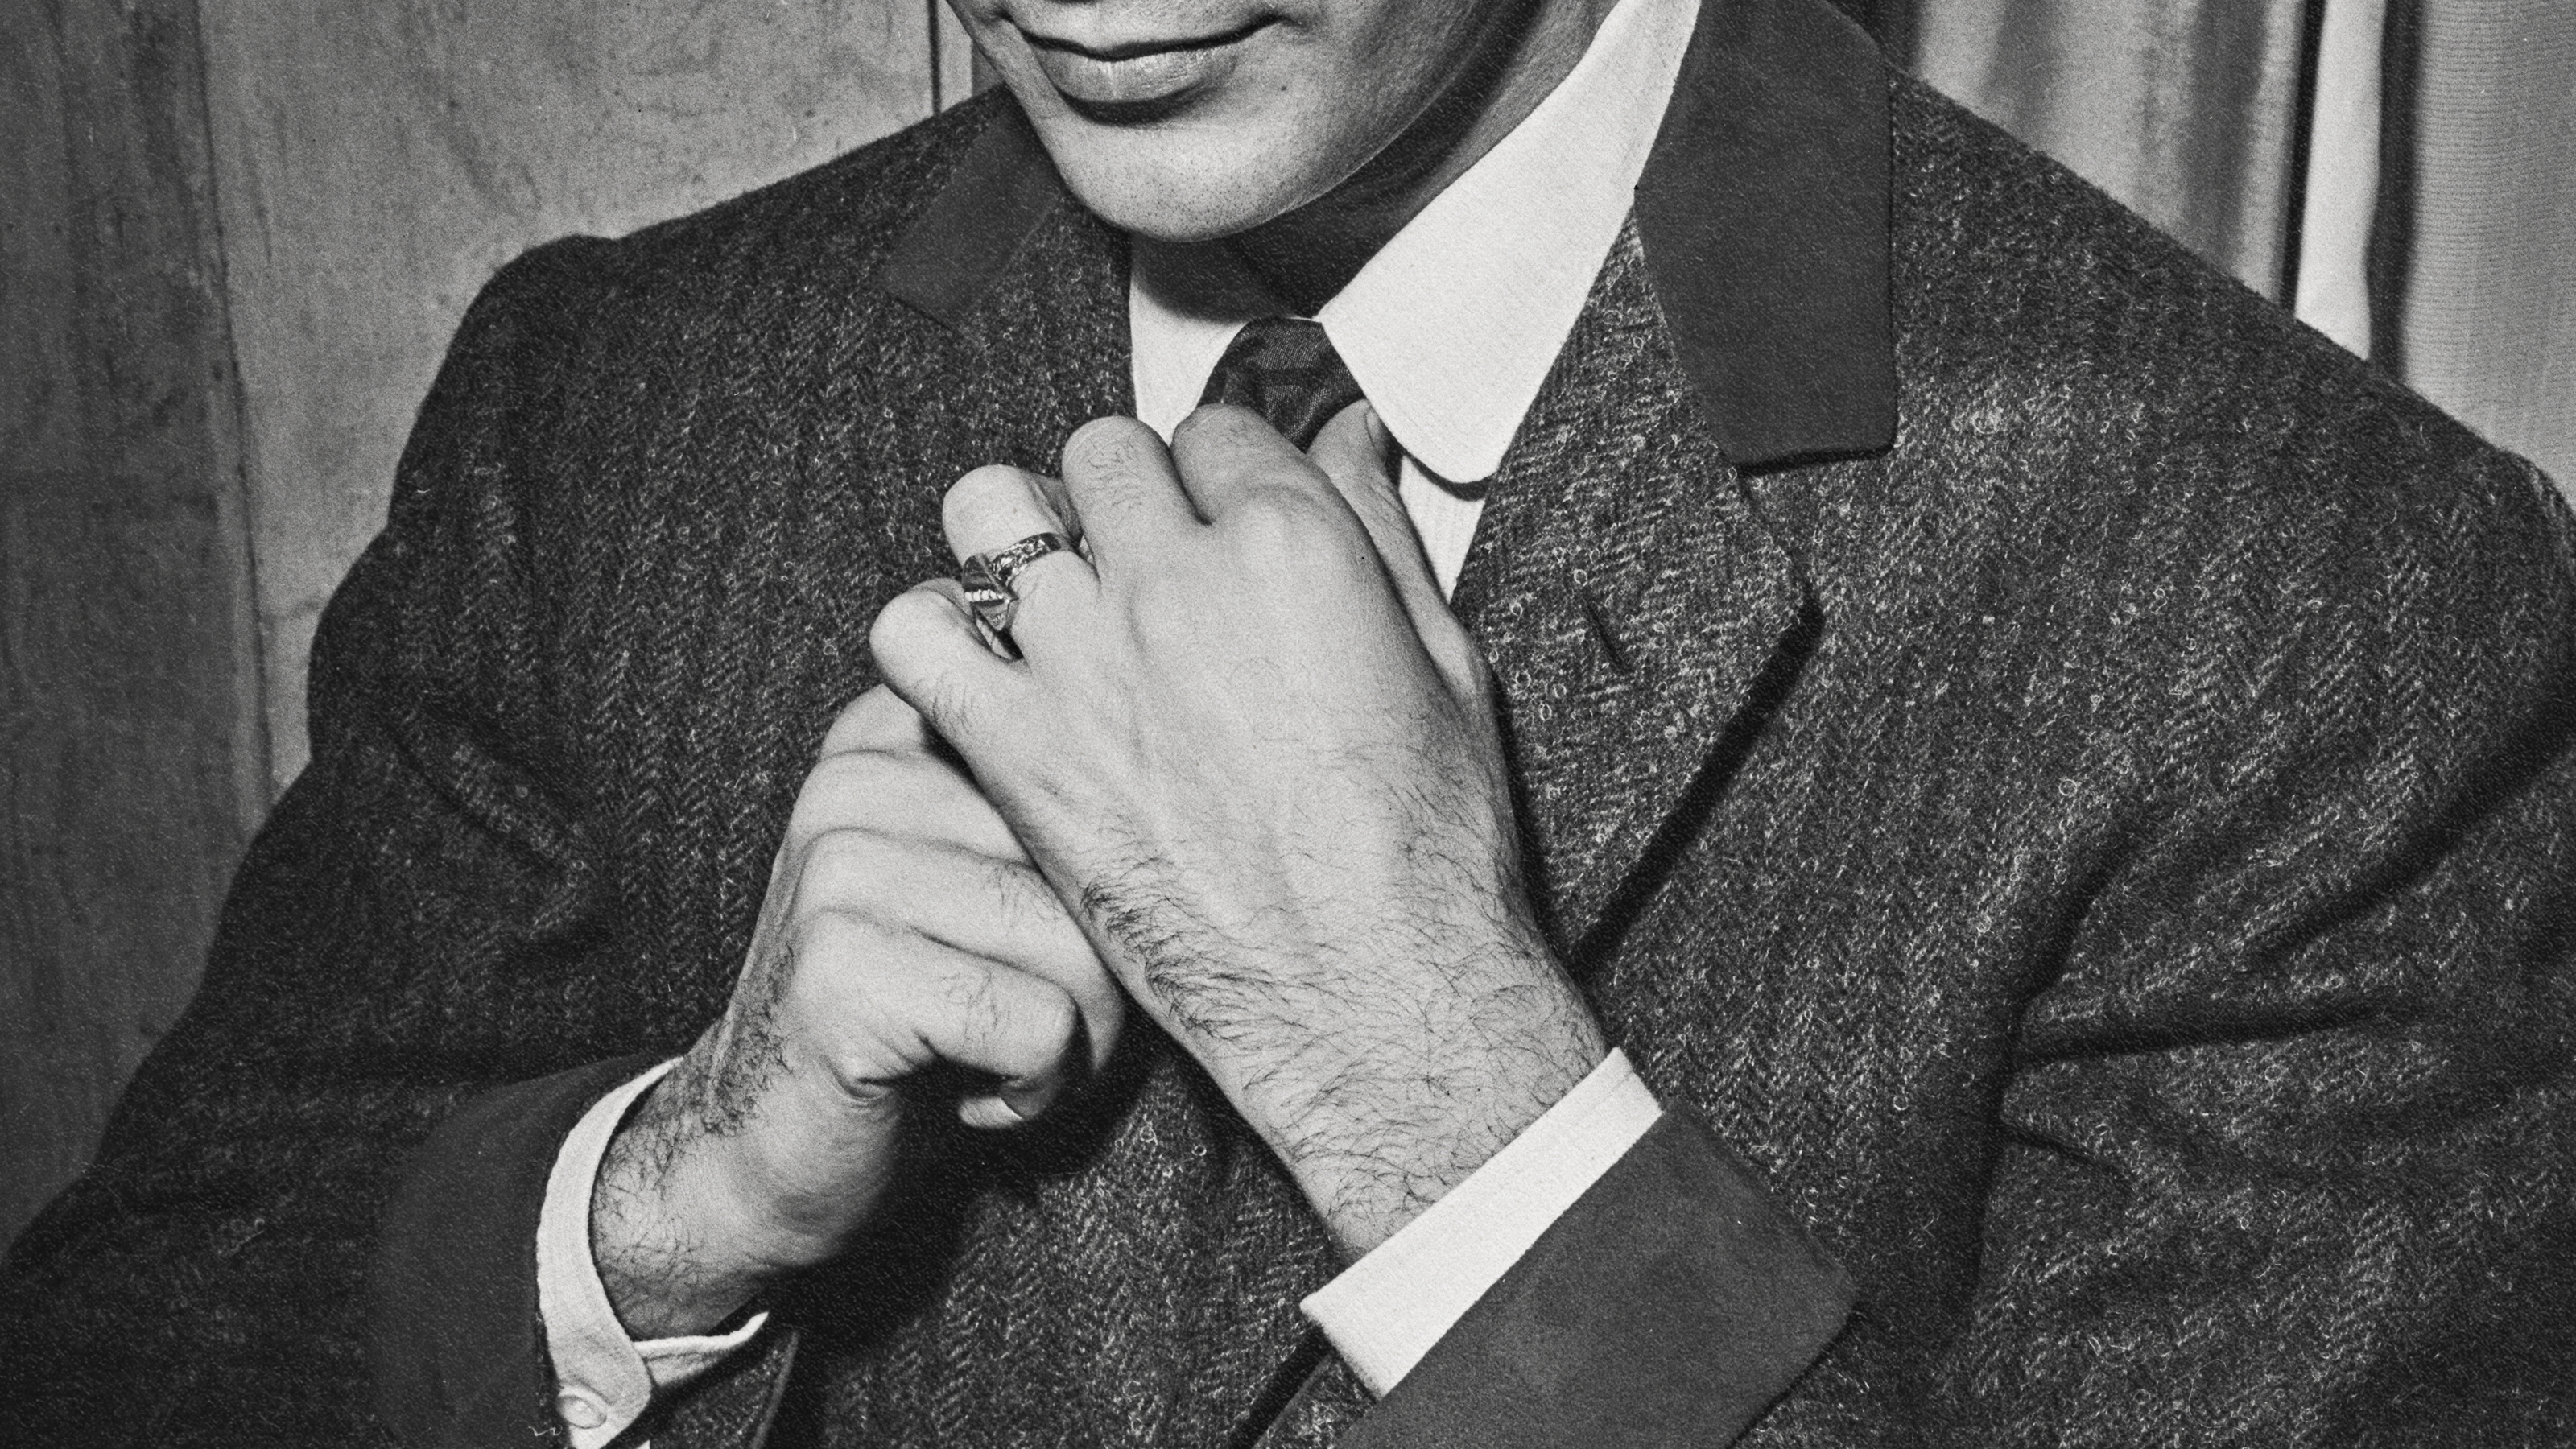 A successful man in a suit captured in a black and white photo.